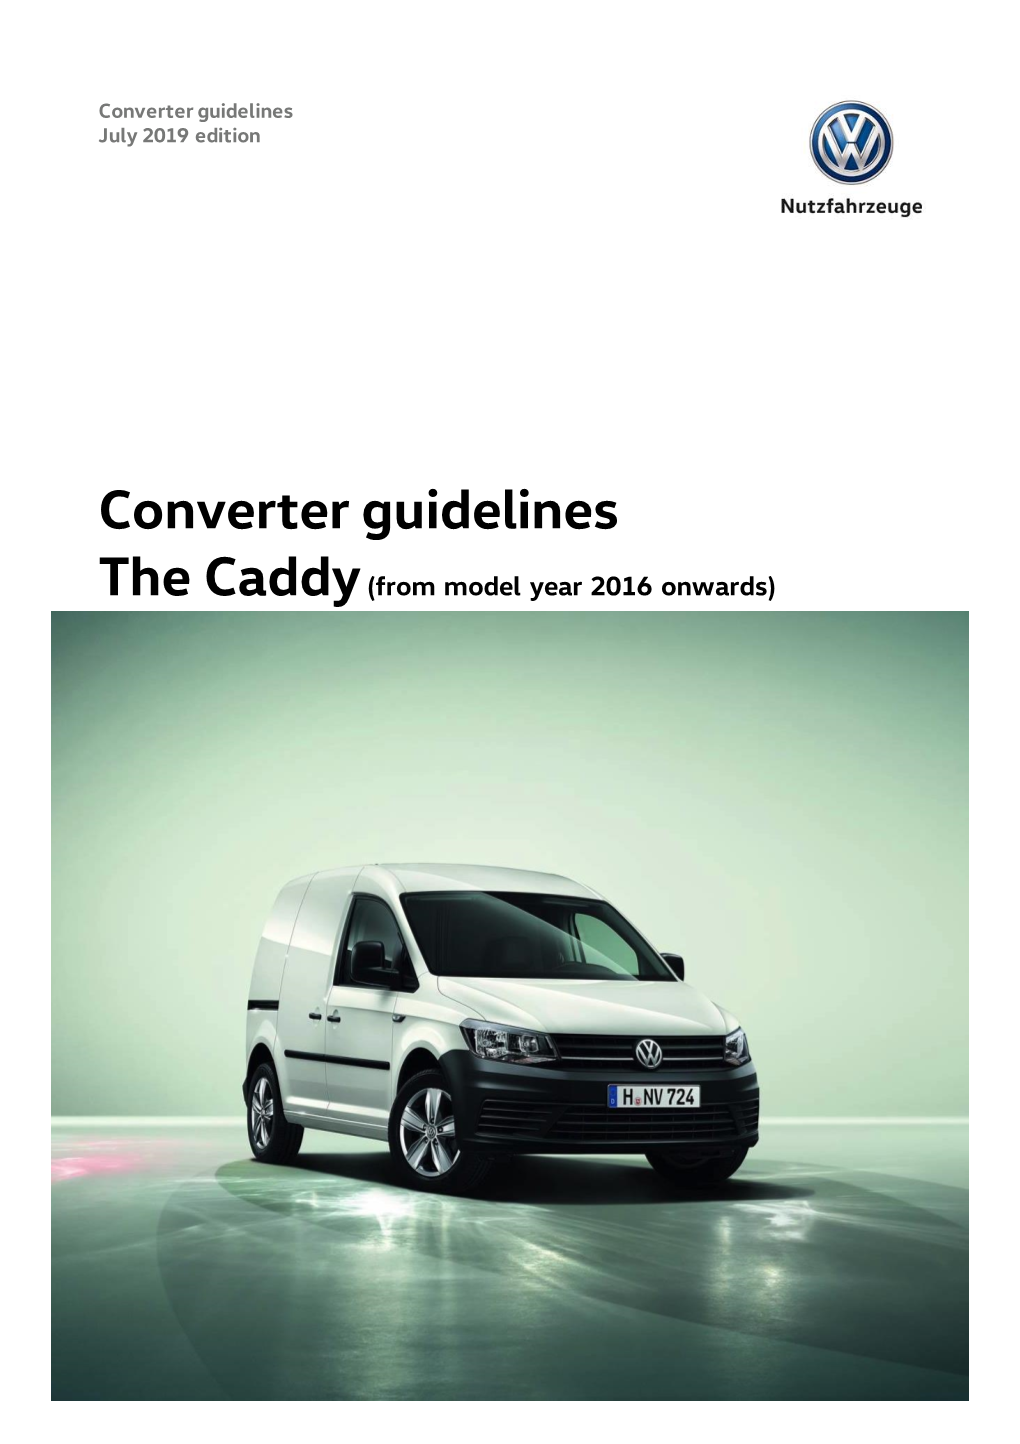 Converter Guidelines the Caddy(From Model Year 2016 Onwards)